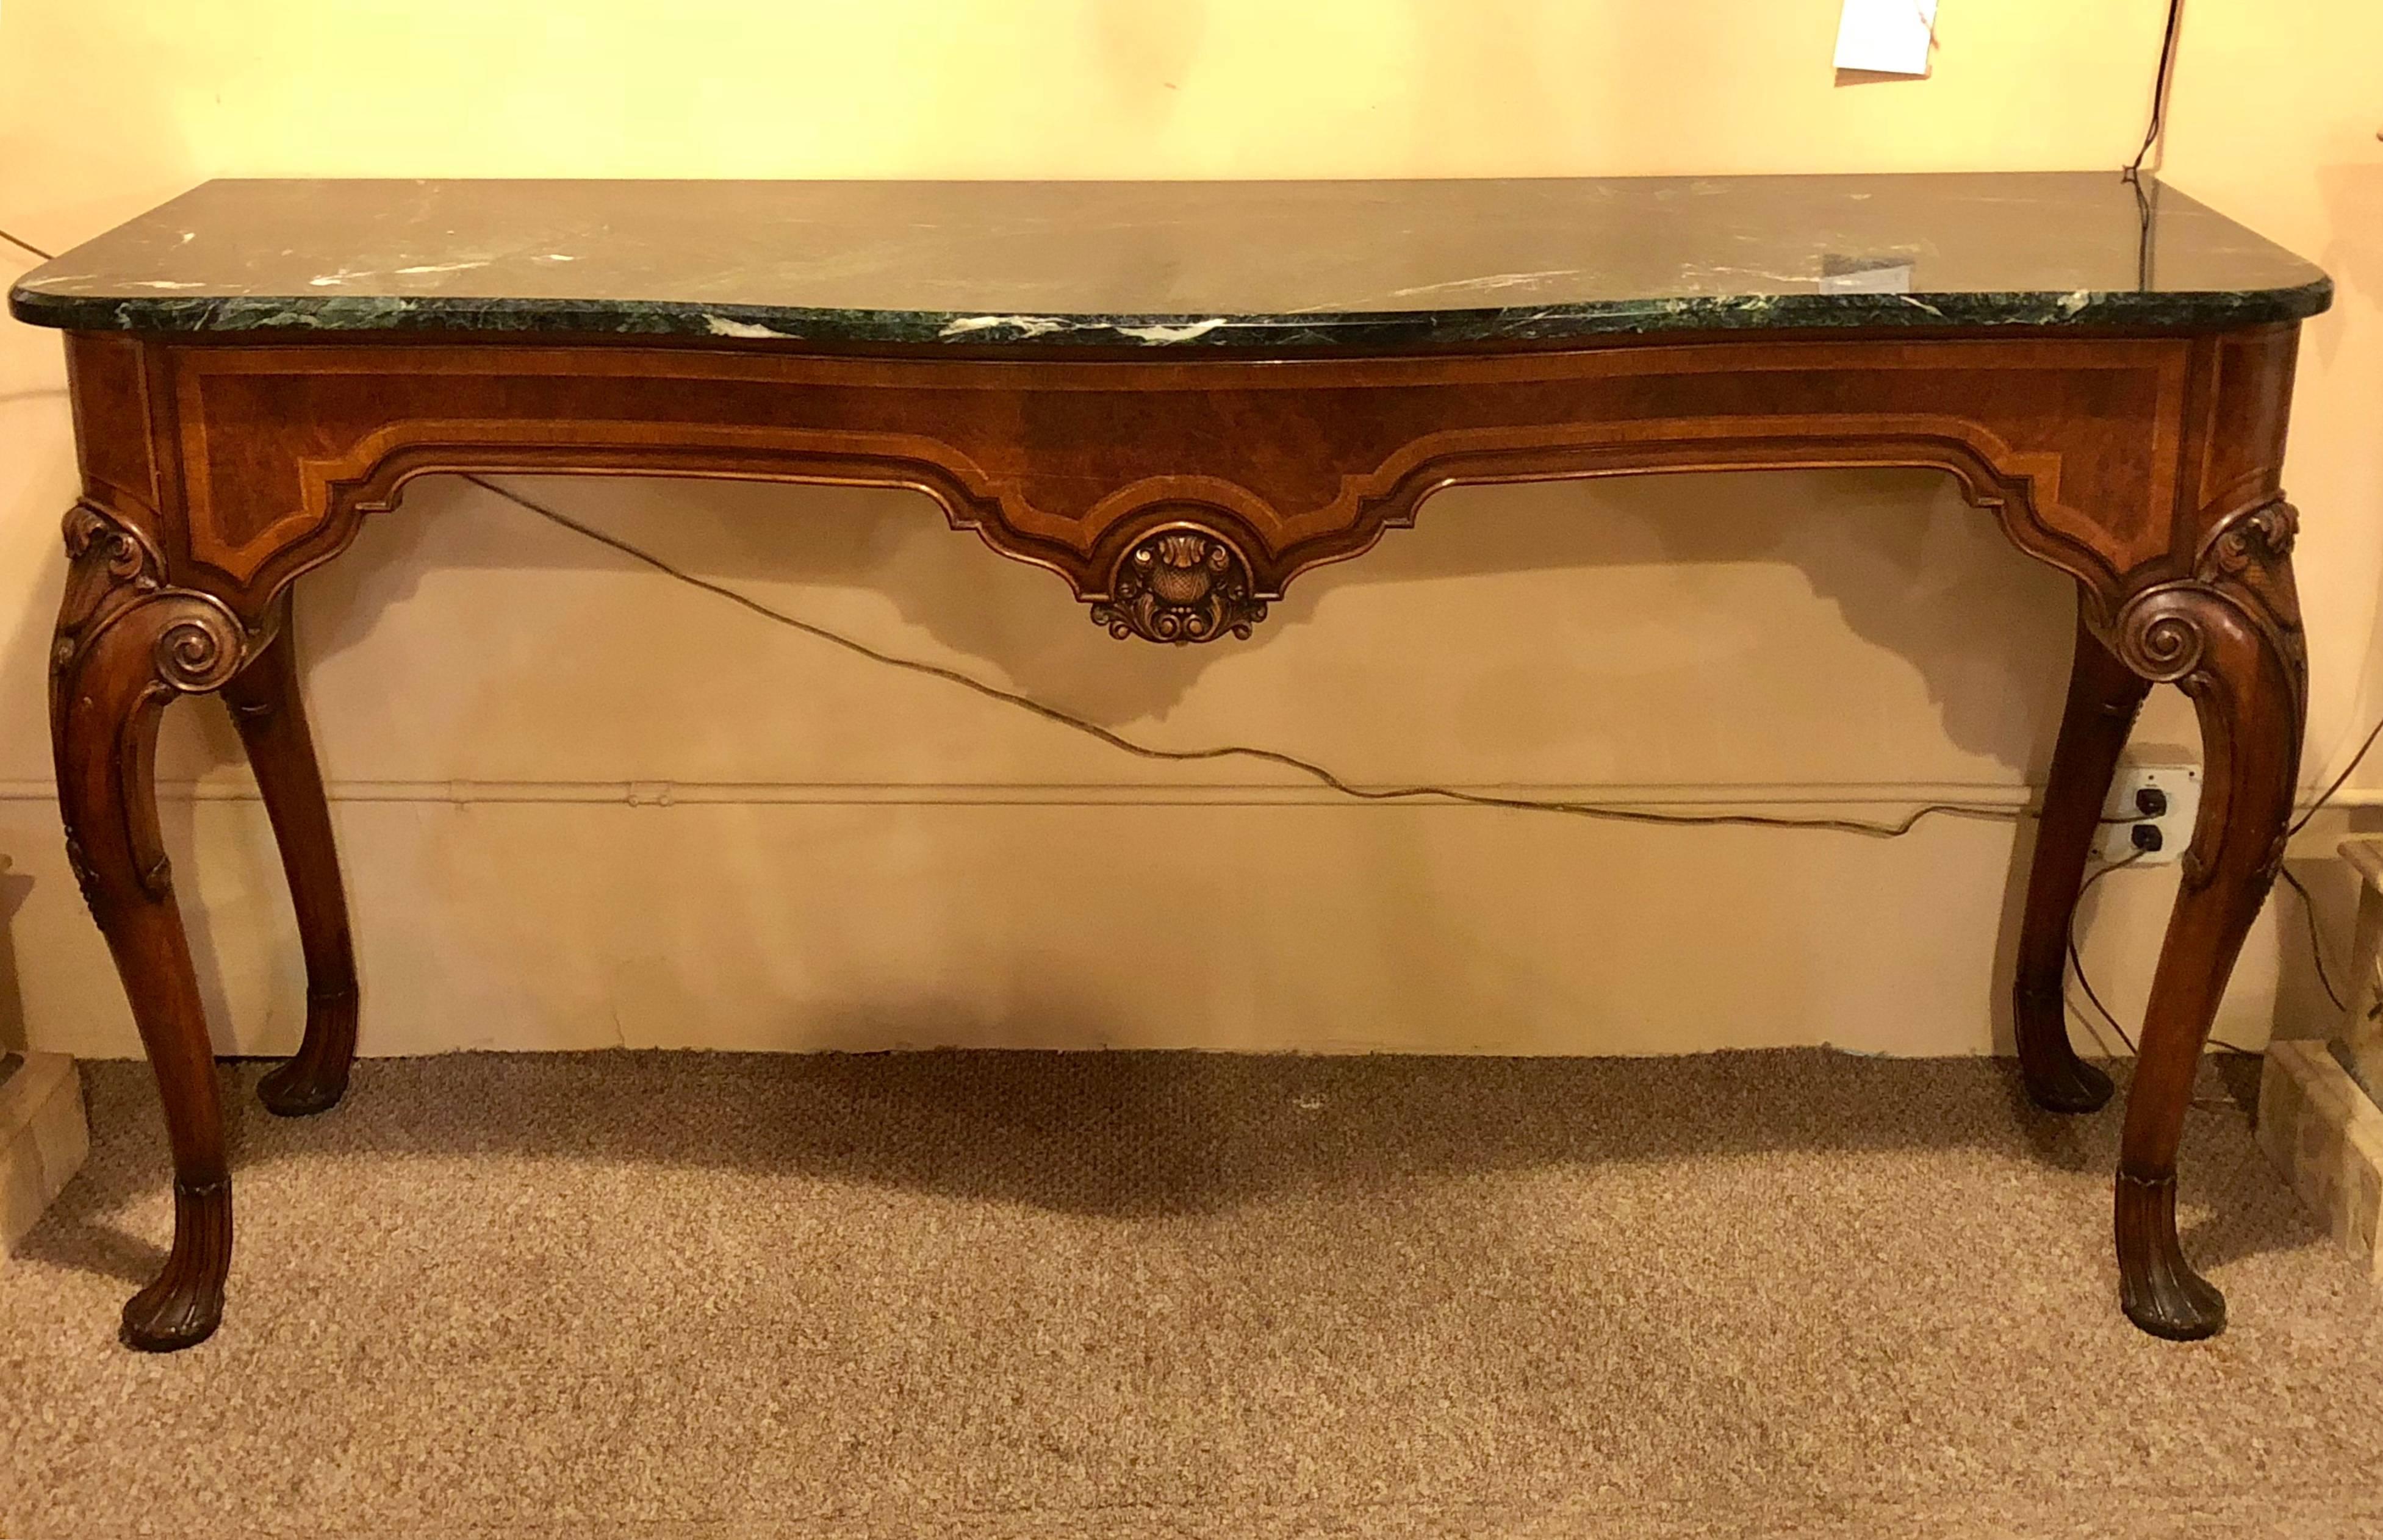 An antique queen Anne fashioned sideboard with a malachite style marble top. This fine custom quality sideboard or console table is all-over banded in a satinwood highlighting a burl wood and walnut base. The whole on shell feet and cabriole legs